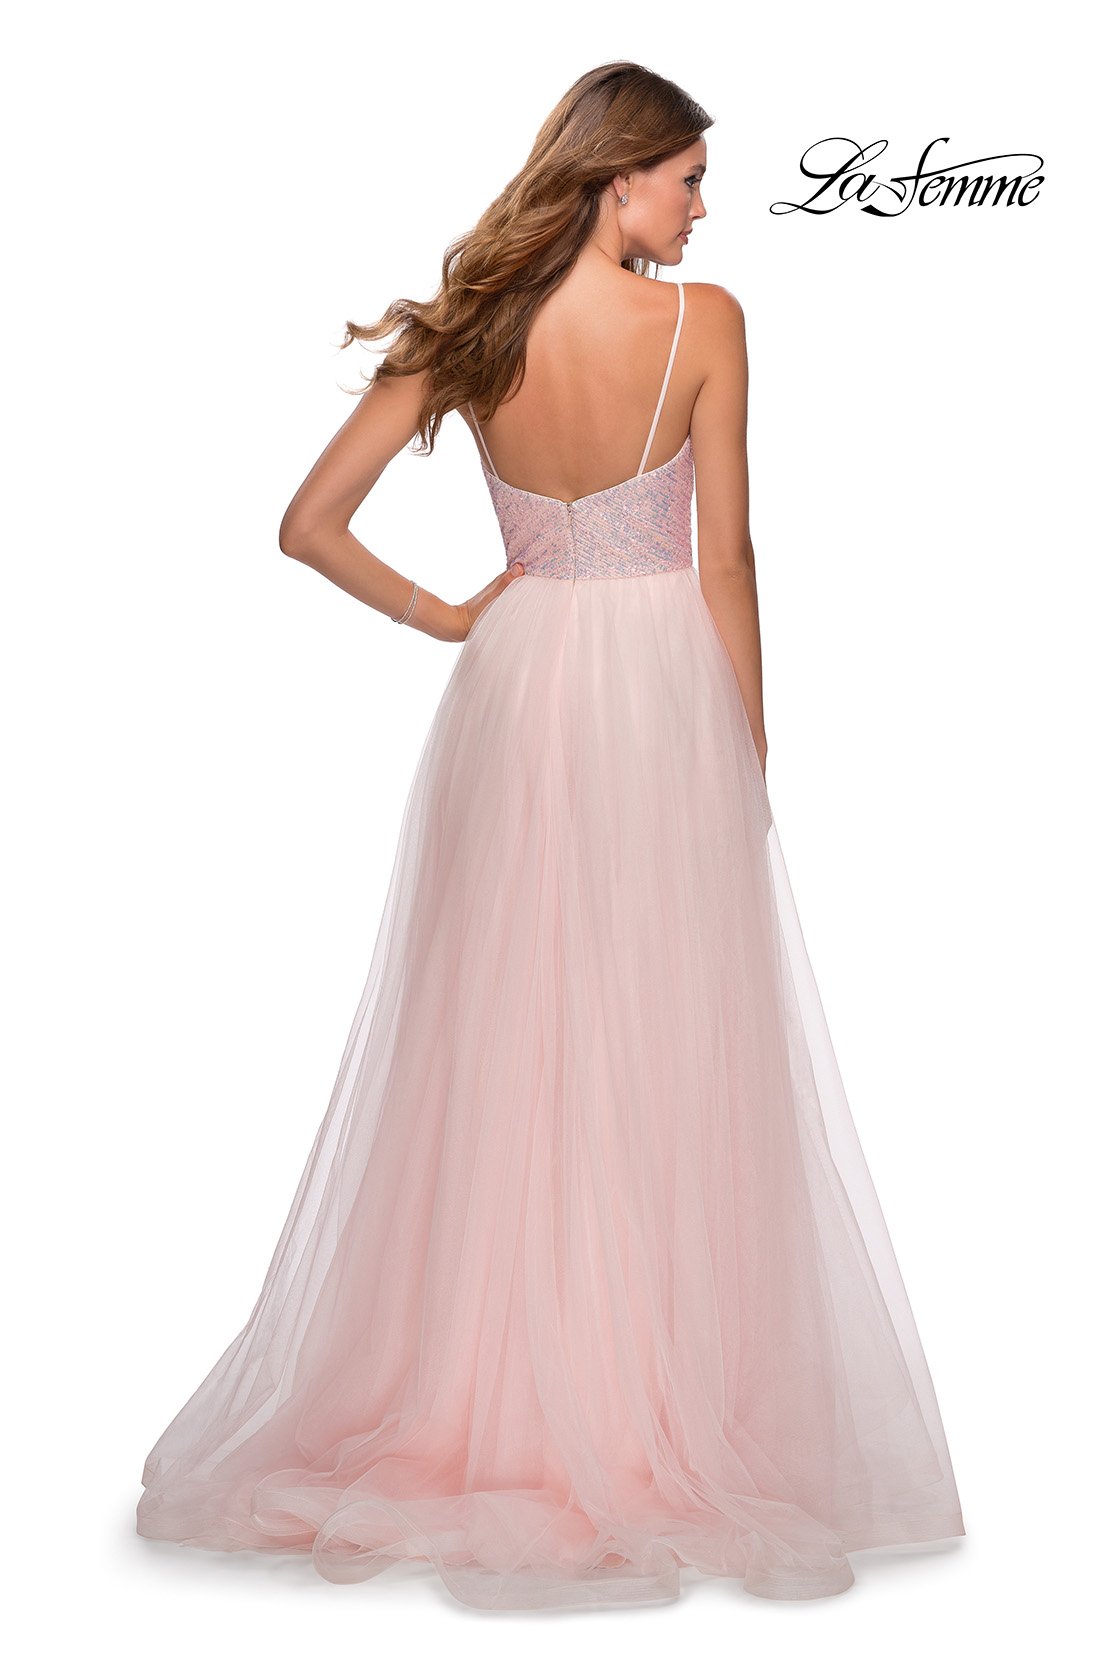 La Femme 28464 dress images in these colors: Light Pink.